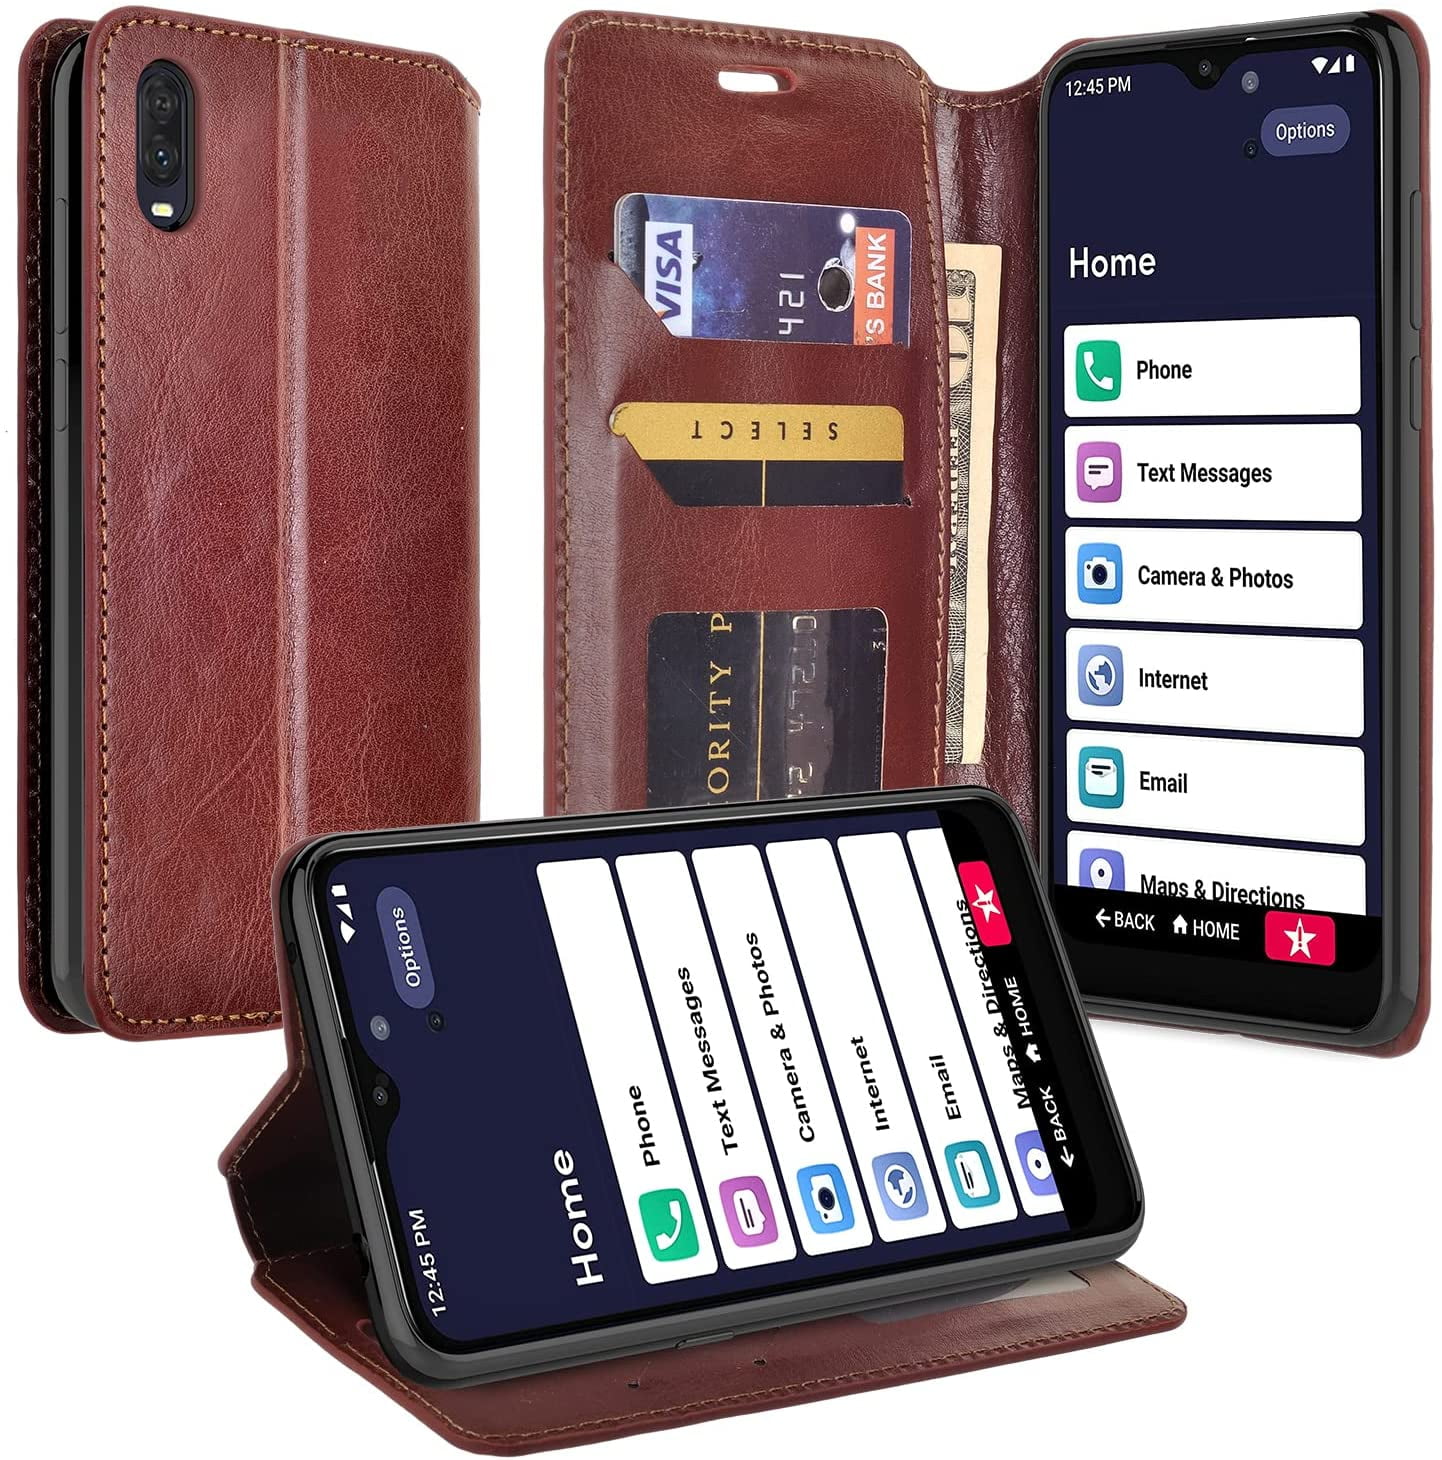 Jitterbug Smart 3 / Lively Smart Case, PU Leather Wallet Case Pouch ...